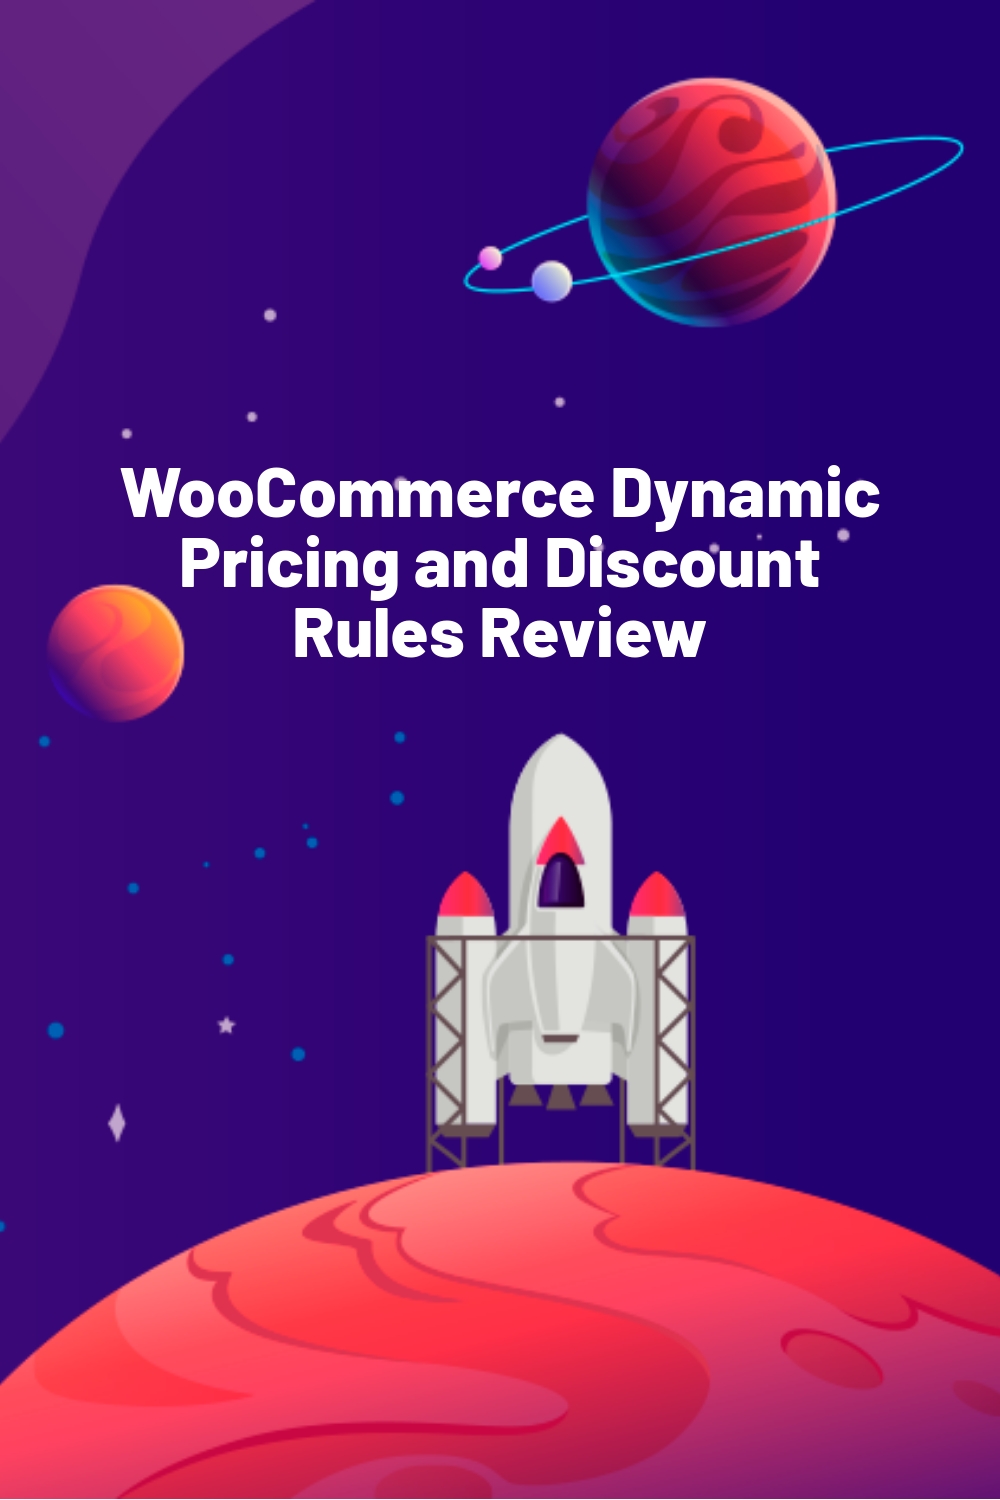 WooCommerce Dynamic Pricing and Discount Rules Review